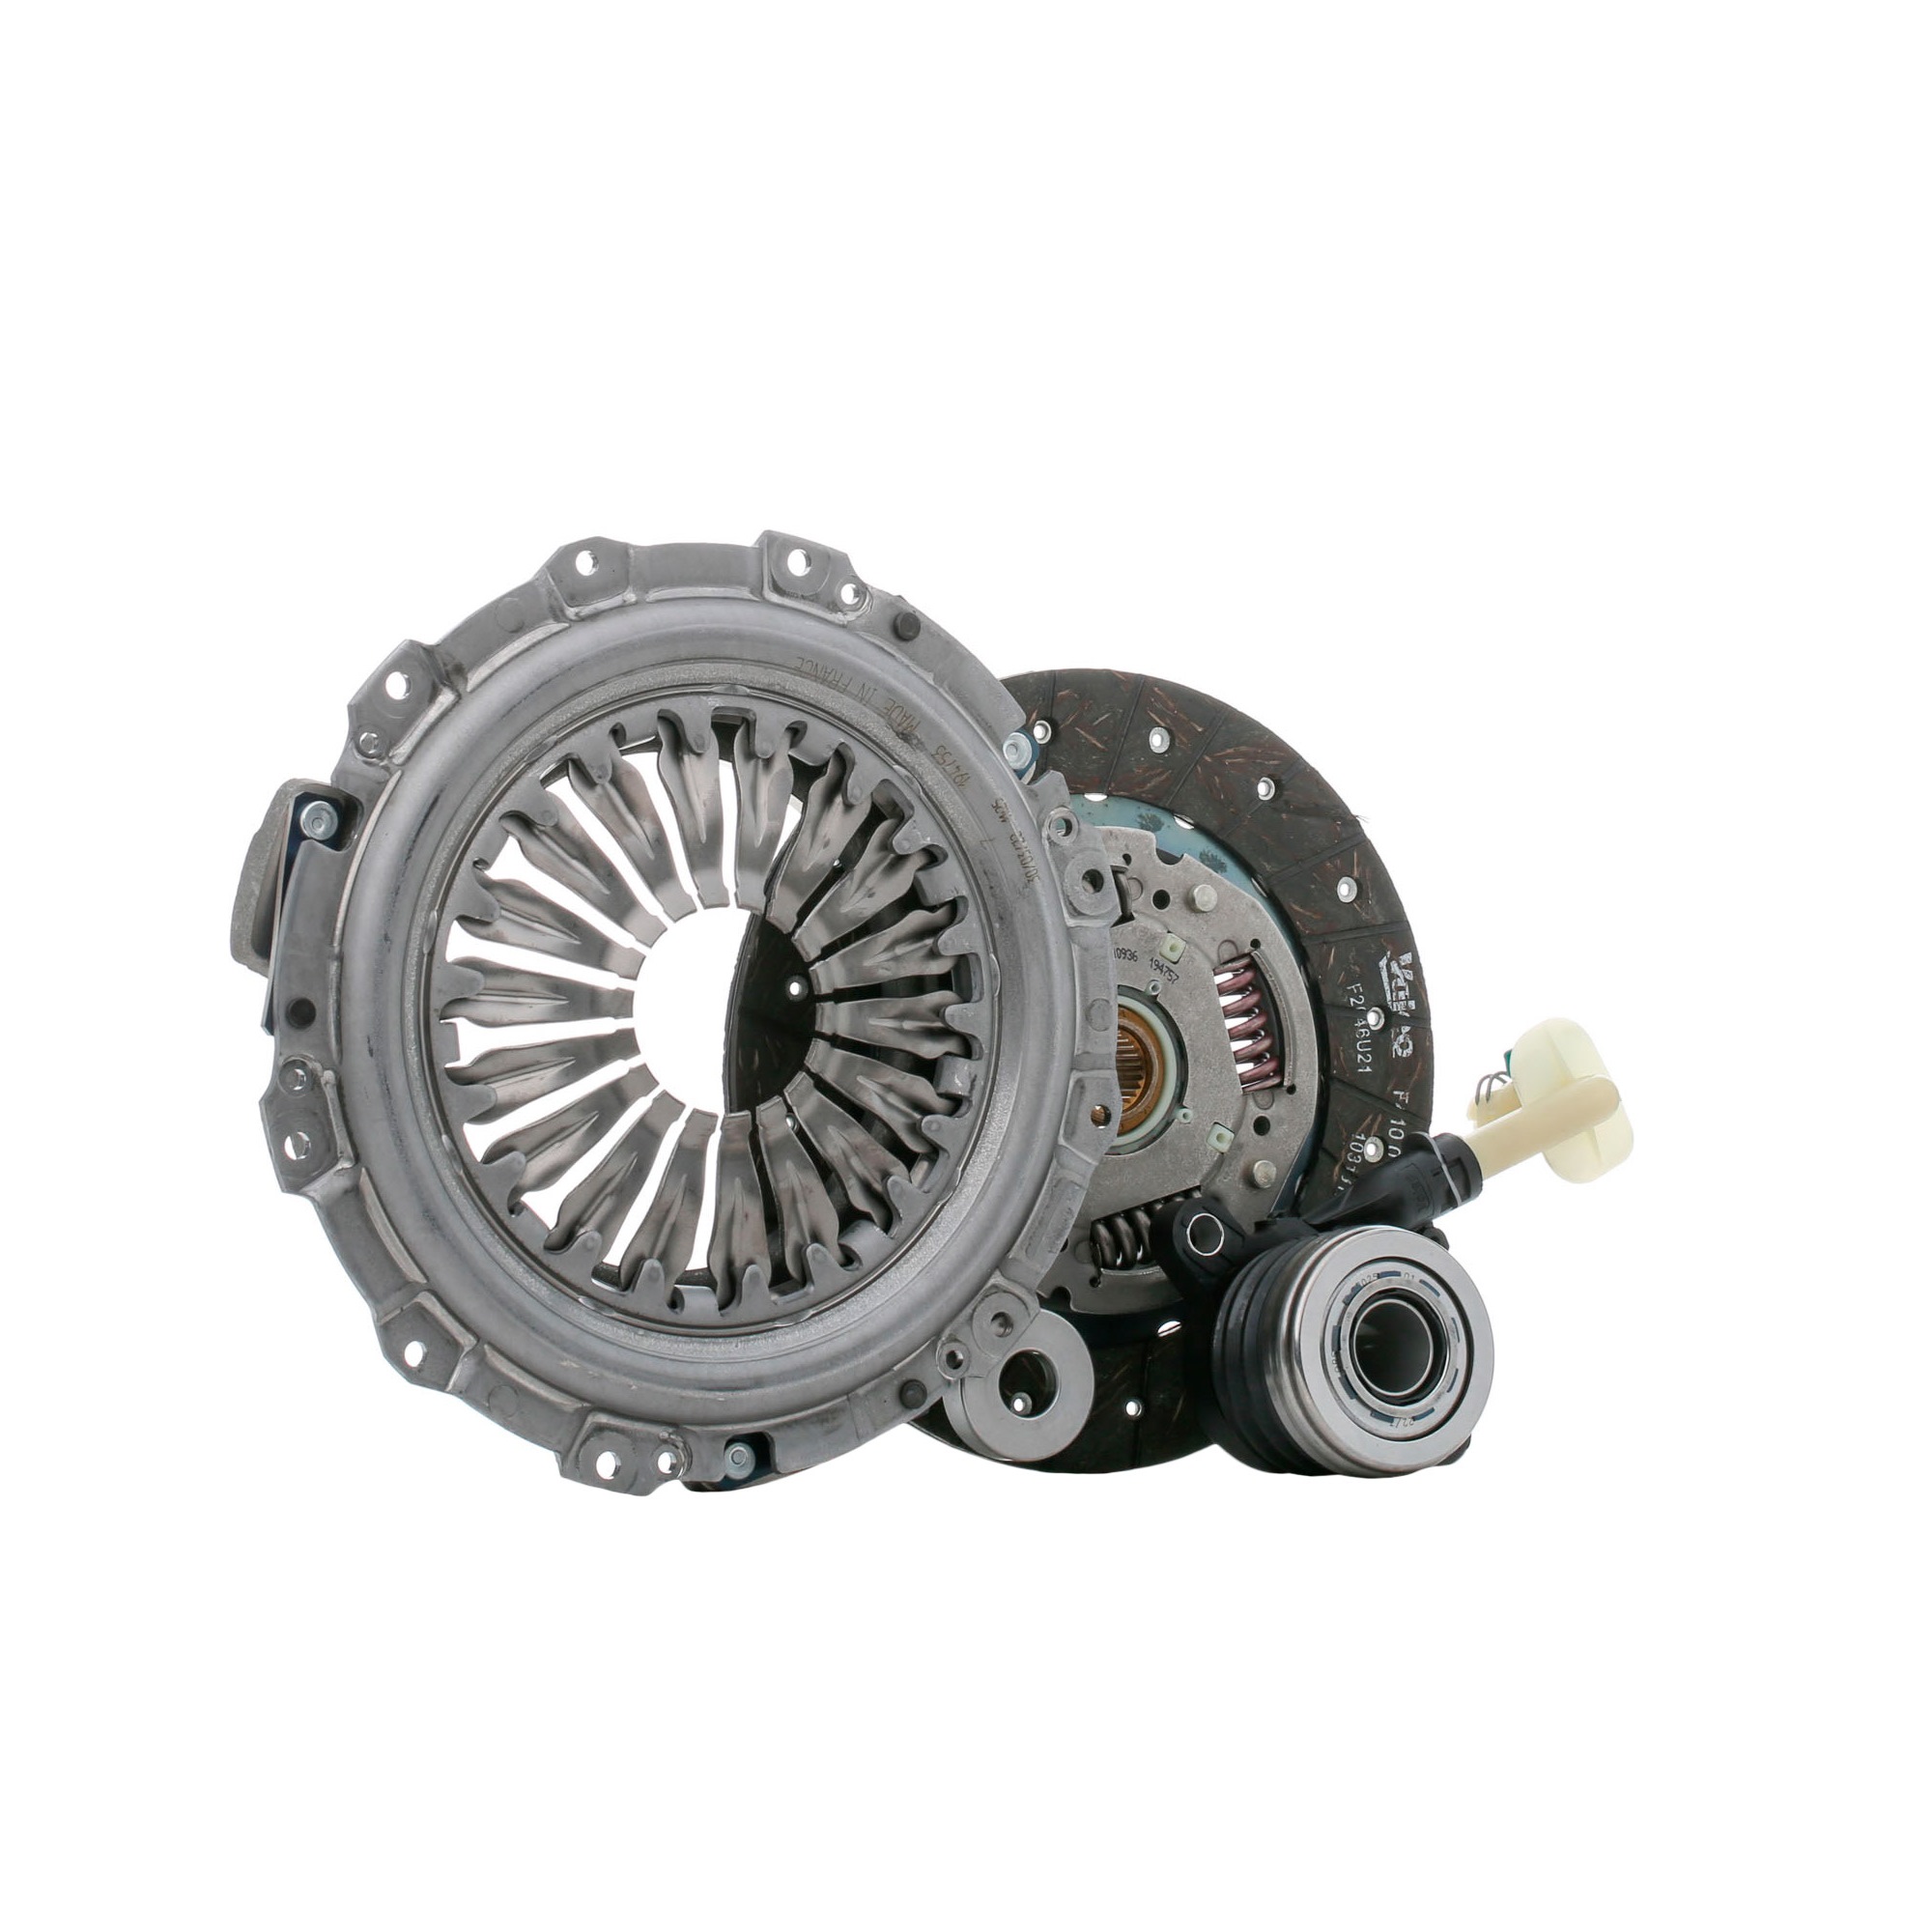 VALEO KIT3P (CSC) 834095 Clutch kit with central slave cylinder, 215mm